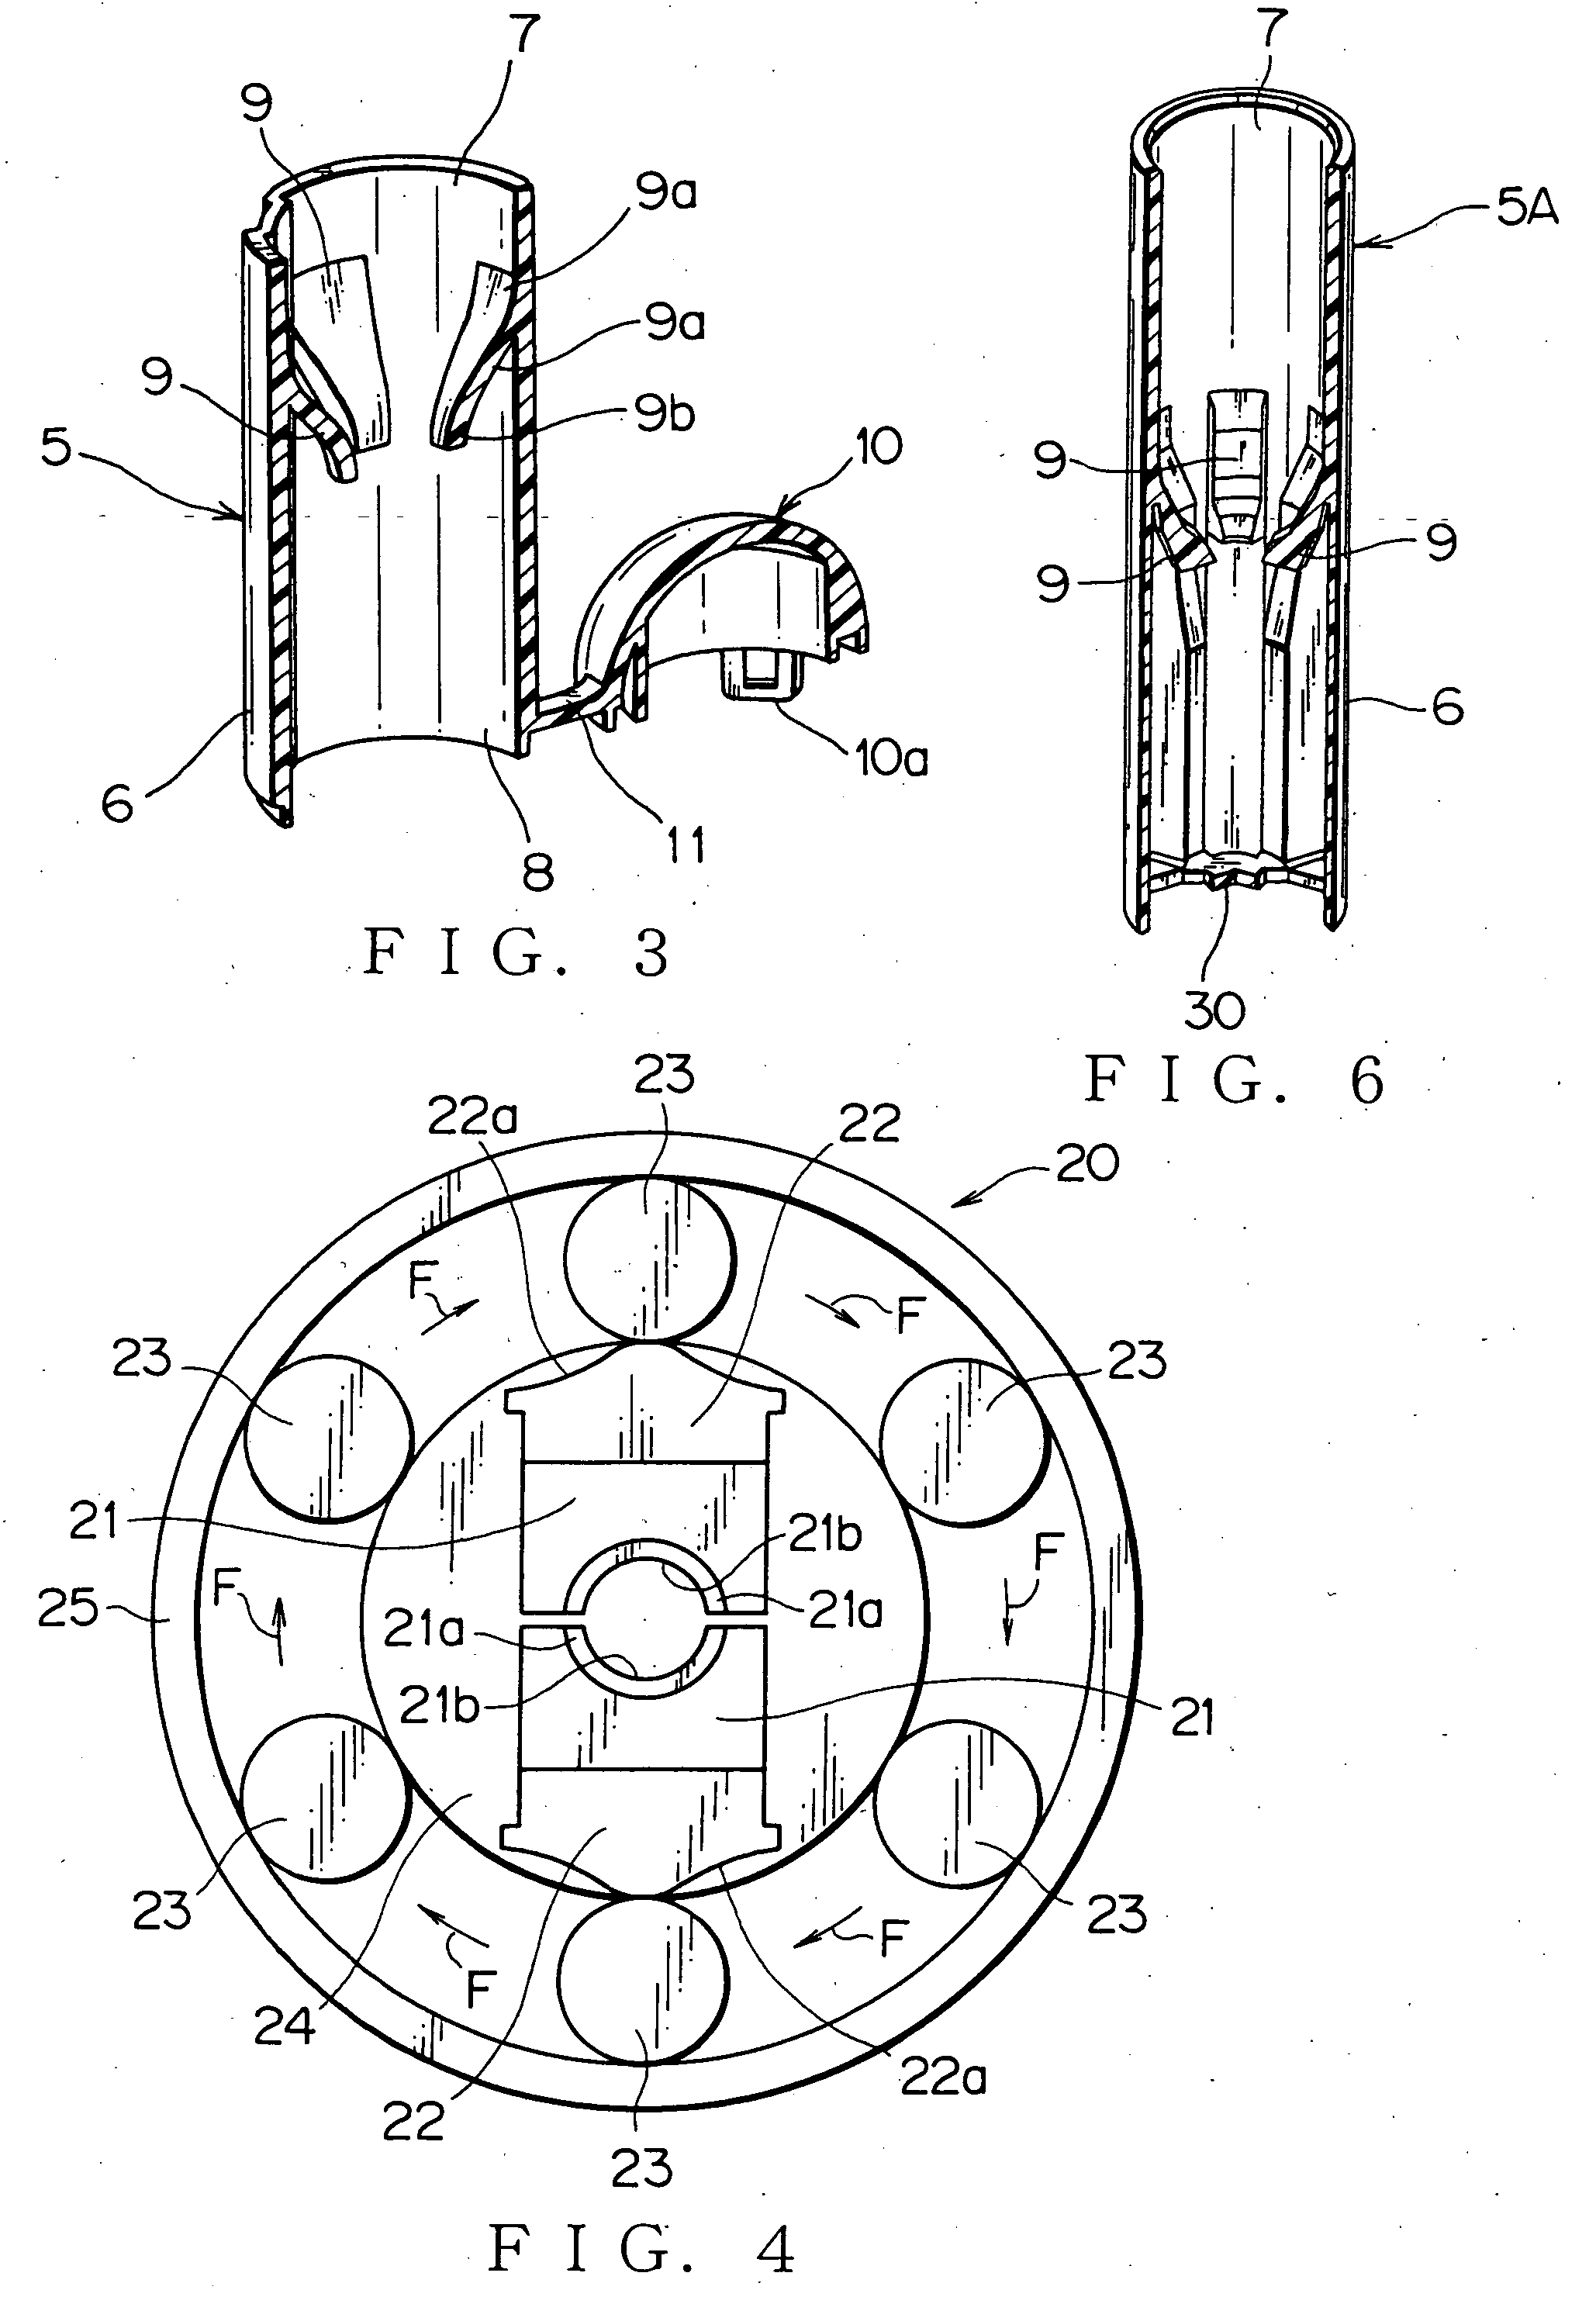 Insulation cap and joined electrical wire using the same